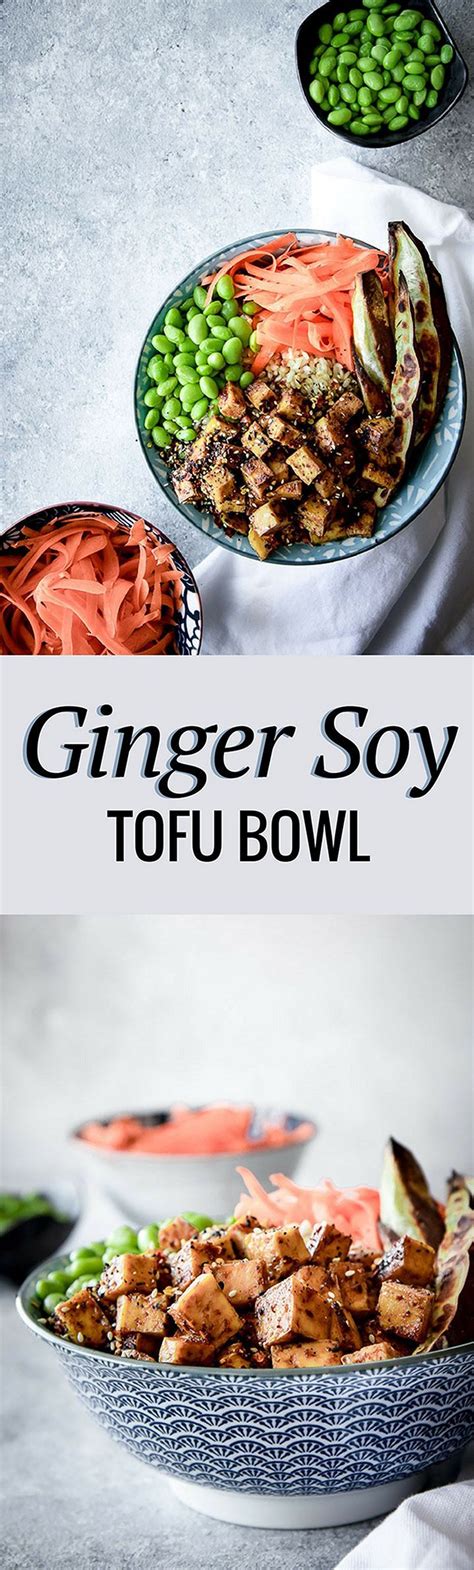 Looking for the best tofu recipes? Ginger Soy Tofu Bowl | Recipe (With images) | Soy tofu ...